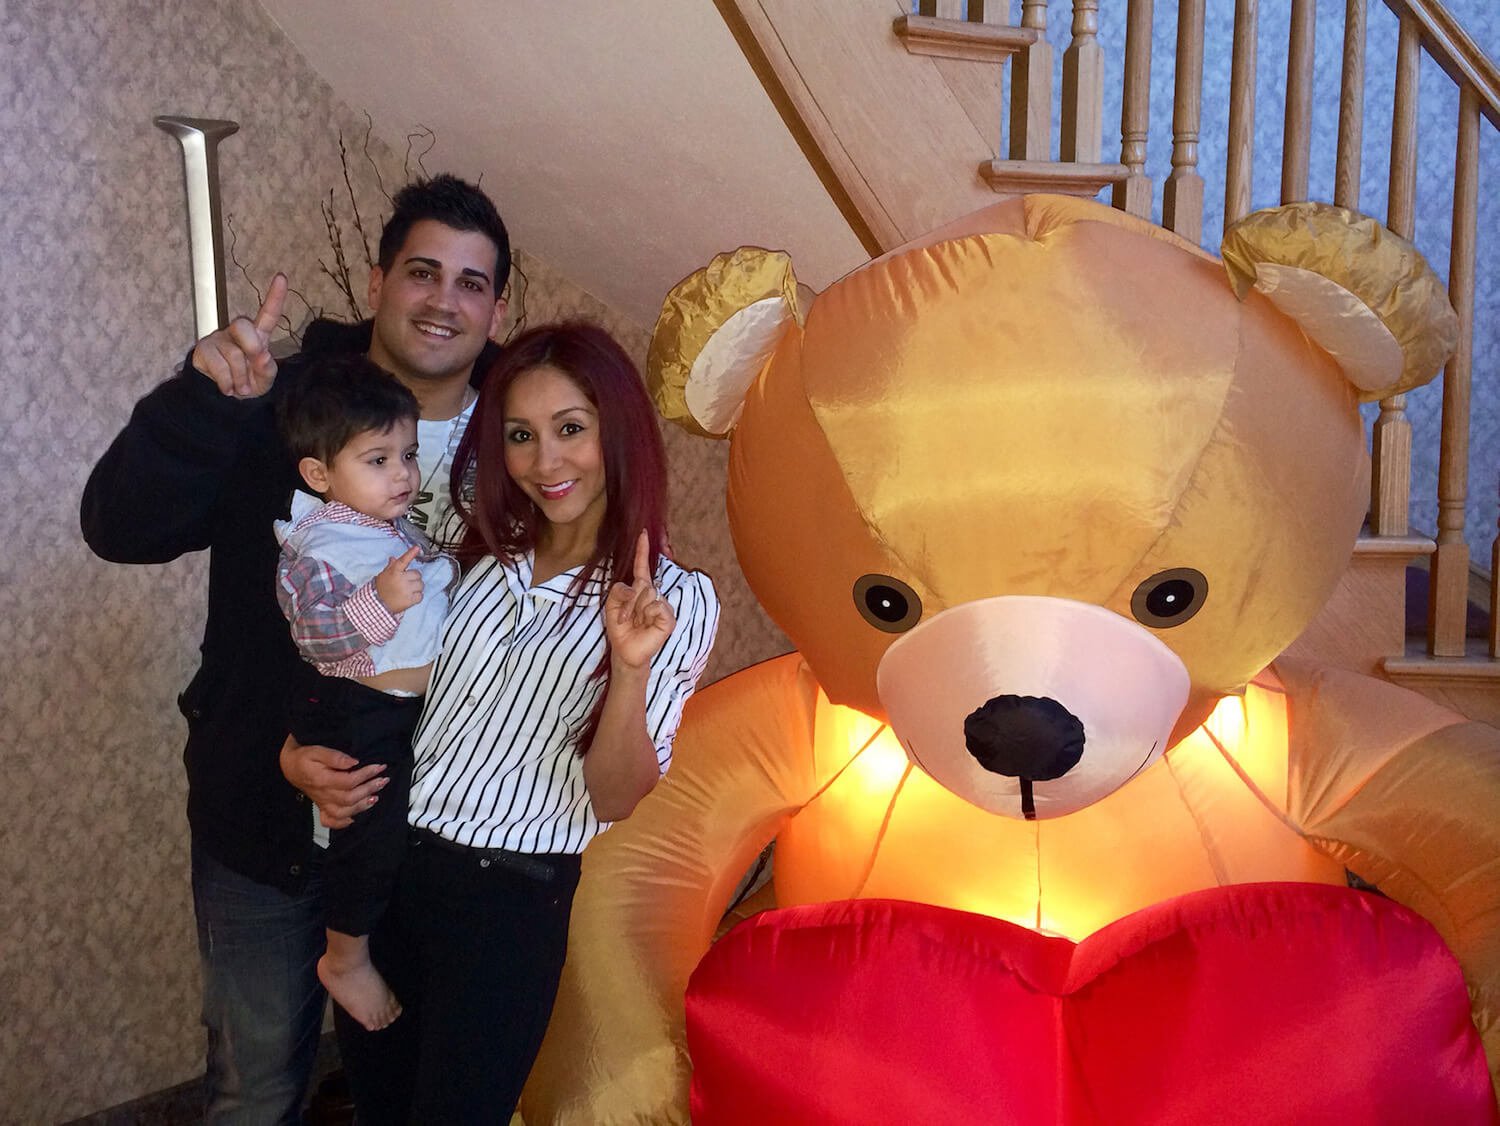 'Jersey Shore: Family Vacation star Nicole 'Snooki' Polizzi holding her son and standing next to her husband, Jionni LaValle. They're next to an inflatable bear for Valentine's Day.